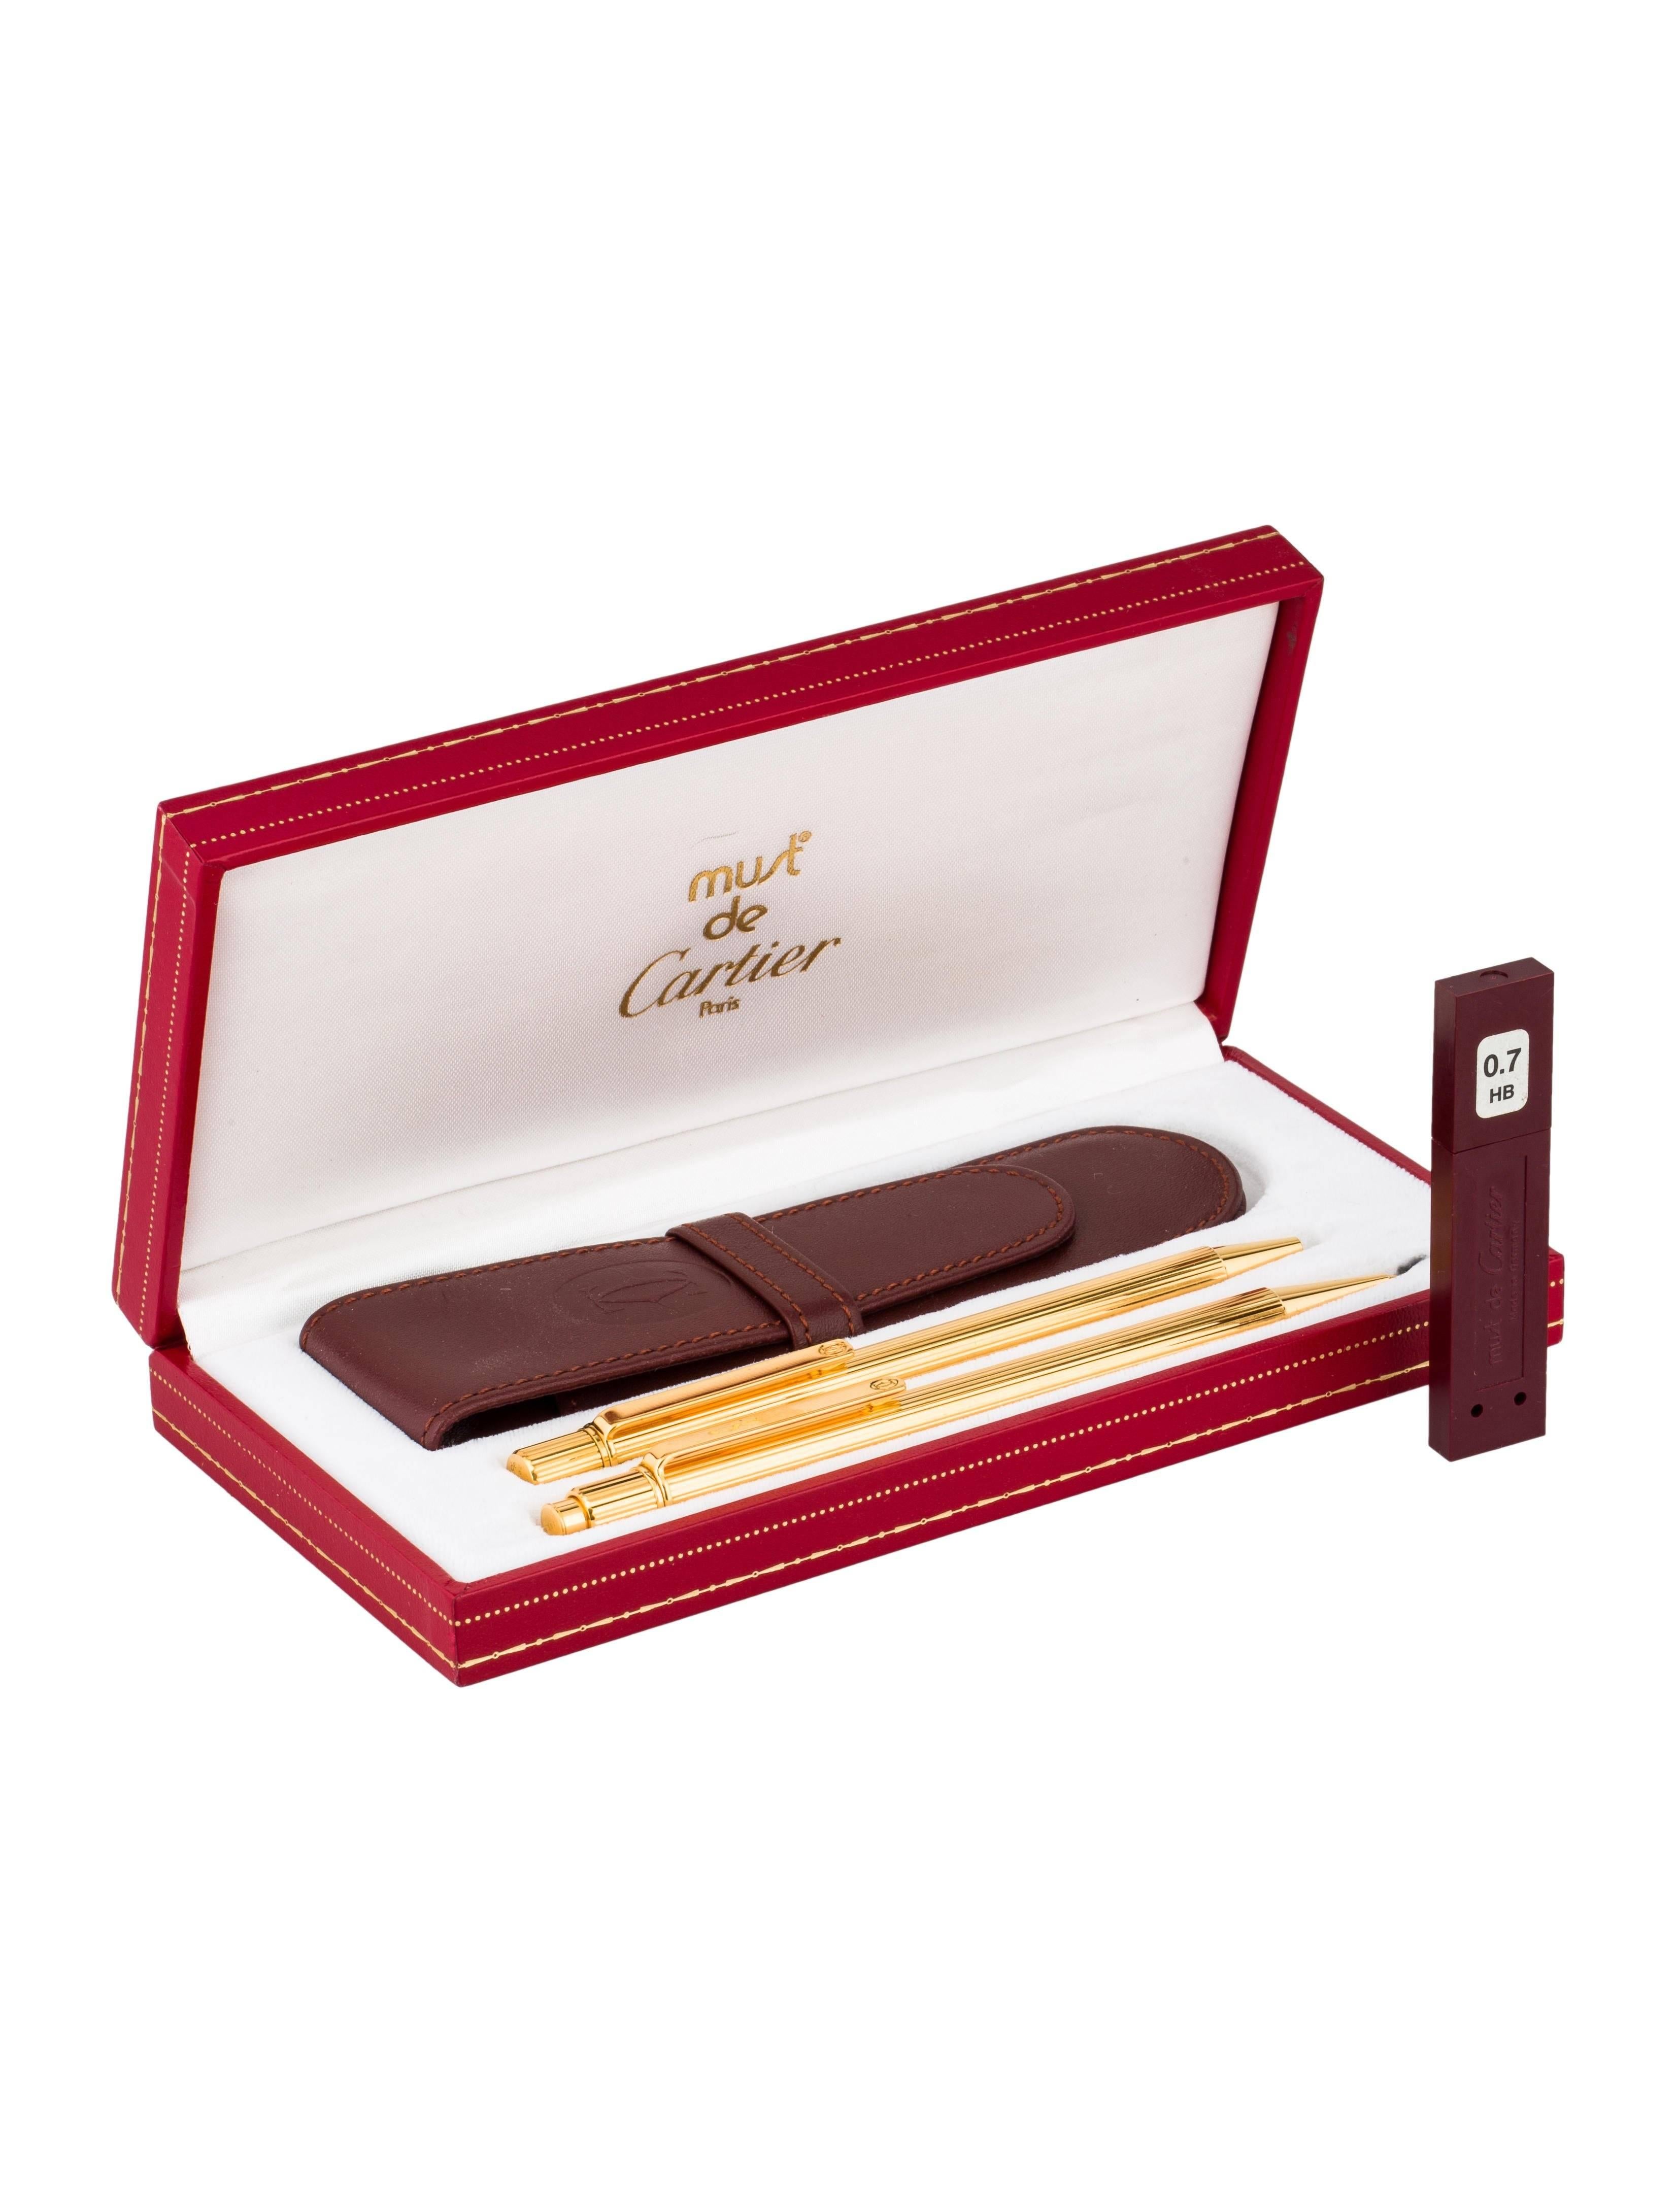 CURATOR'S NOTES

Metal
Gold plated
Set includes mechanical pencil and ballpoint pen 
Twist retractable and push closures
Includes original Cartier leather case, extra lead and box